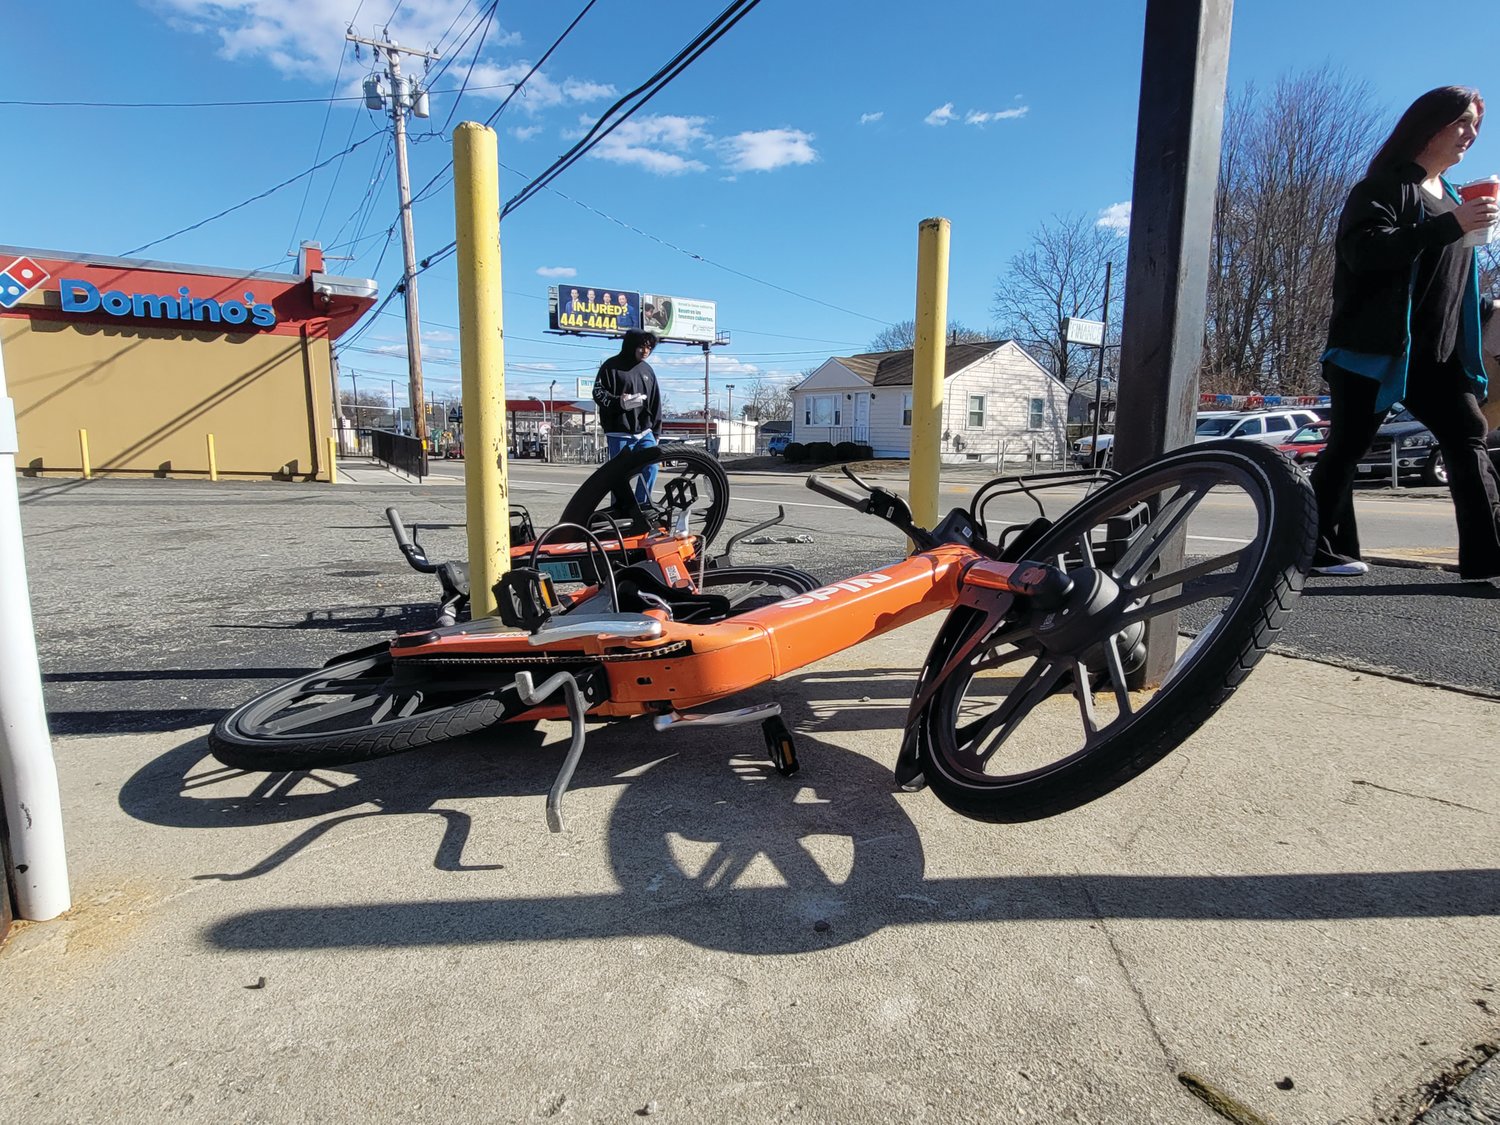 PILING UP: The abandoned electronic bikes and scooters are starting to pile up at locations in Johnston, like this spot on Hartford Avenue near the Providence line. If a Johnston ordinance is approved, police will be able to impound the bikes and scooters and levy fines.